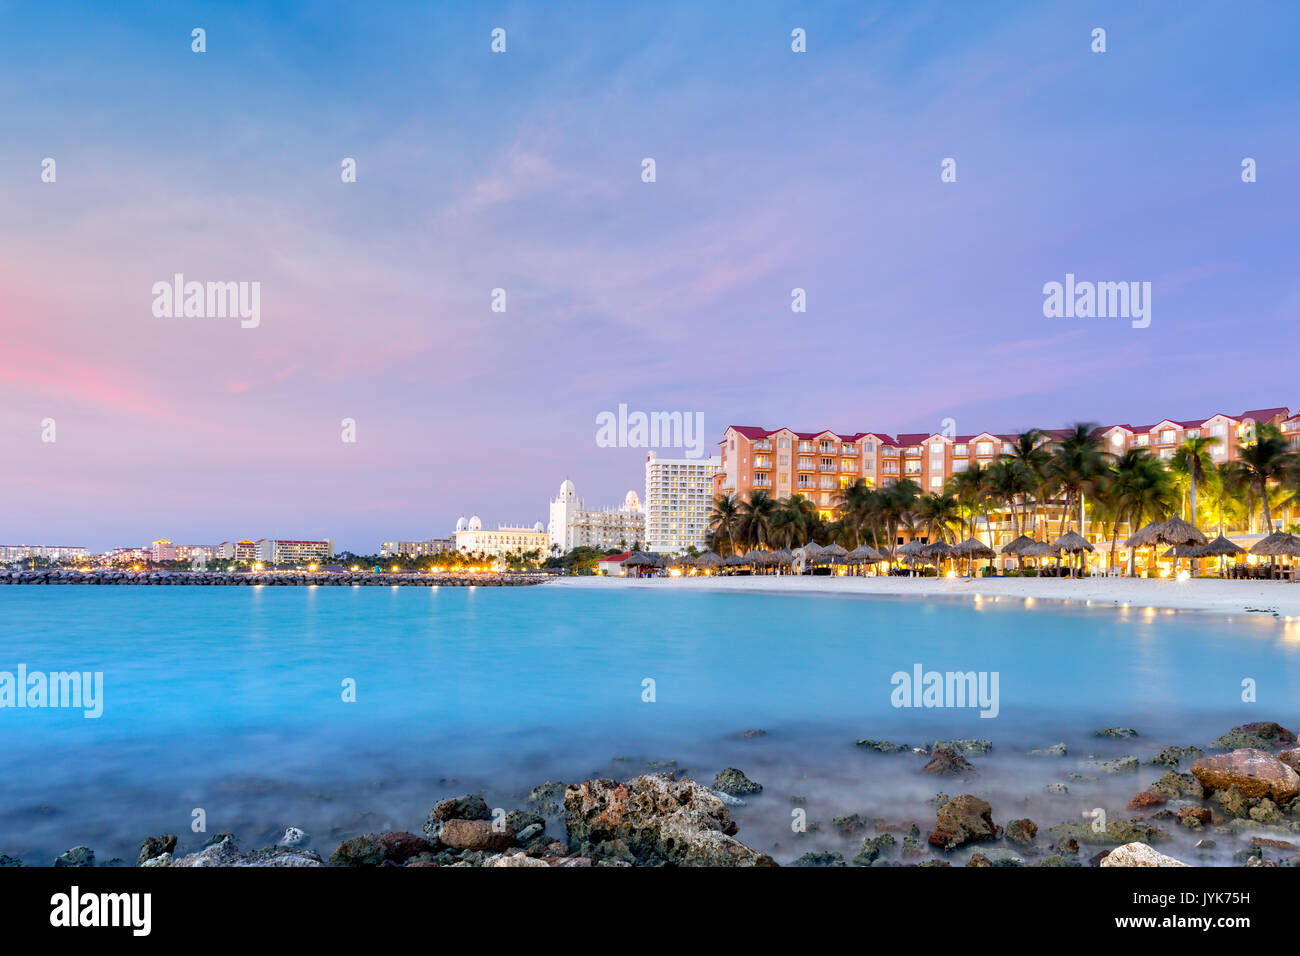 High Rise hotel area in Aruba at dusk. Palm trees in motion suggest the windy weather, a well known characteristic of this island, located on the sout Stock Photo